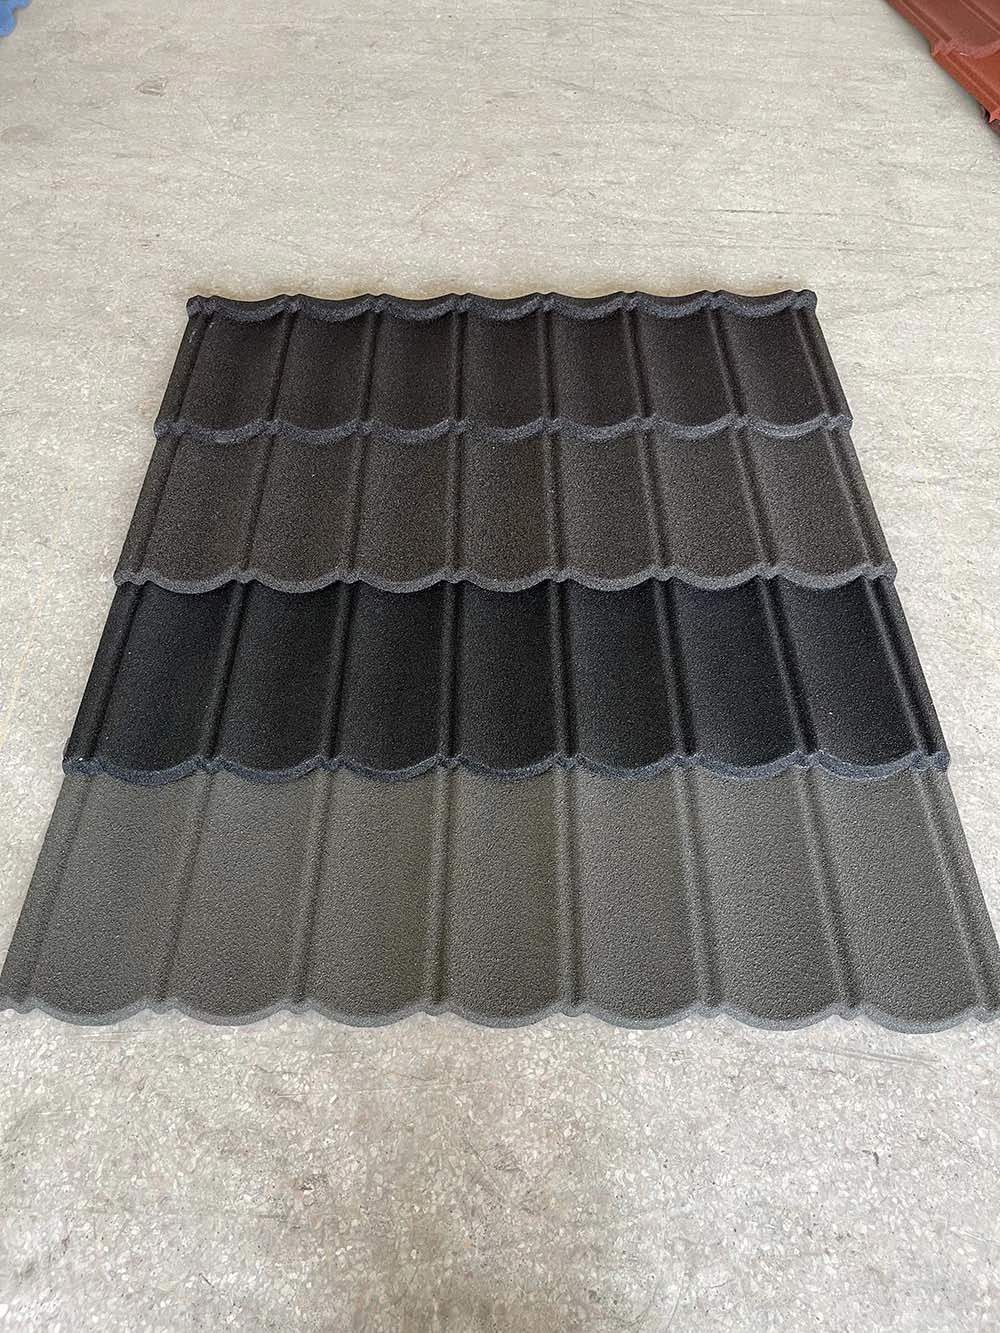 Easy Installing Galvalume Steel Roofing Sheet Modern Construction Roof Materials Colorful House Decoration Building Top Alu-Zinc Rooftop